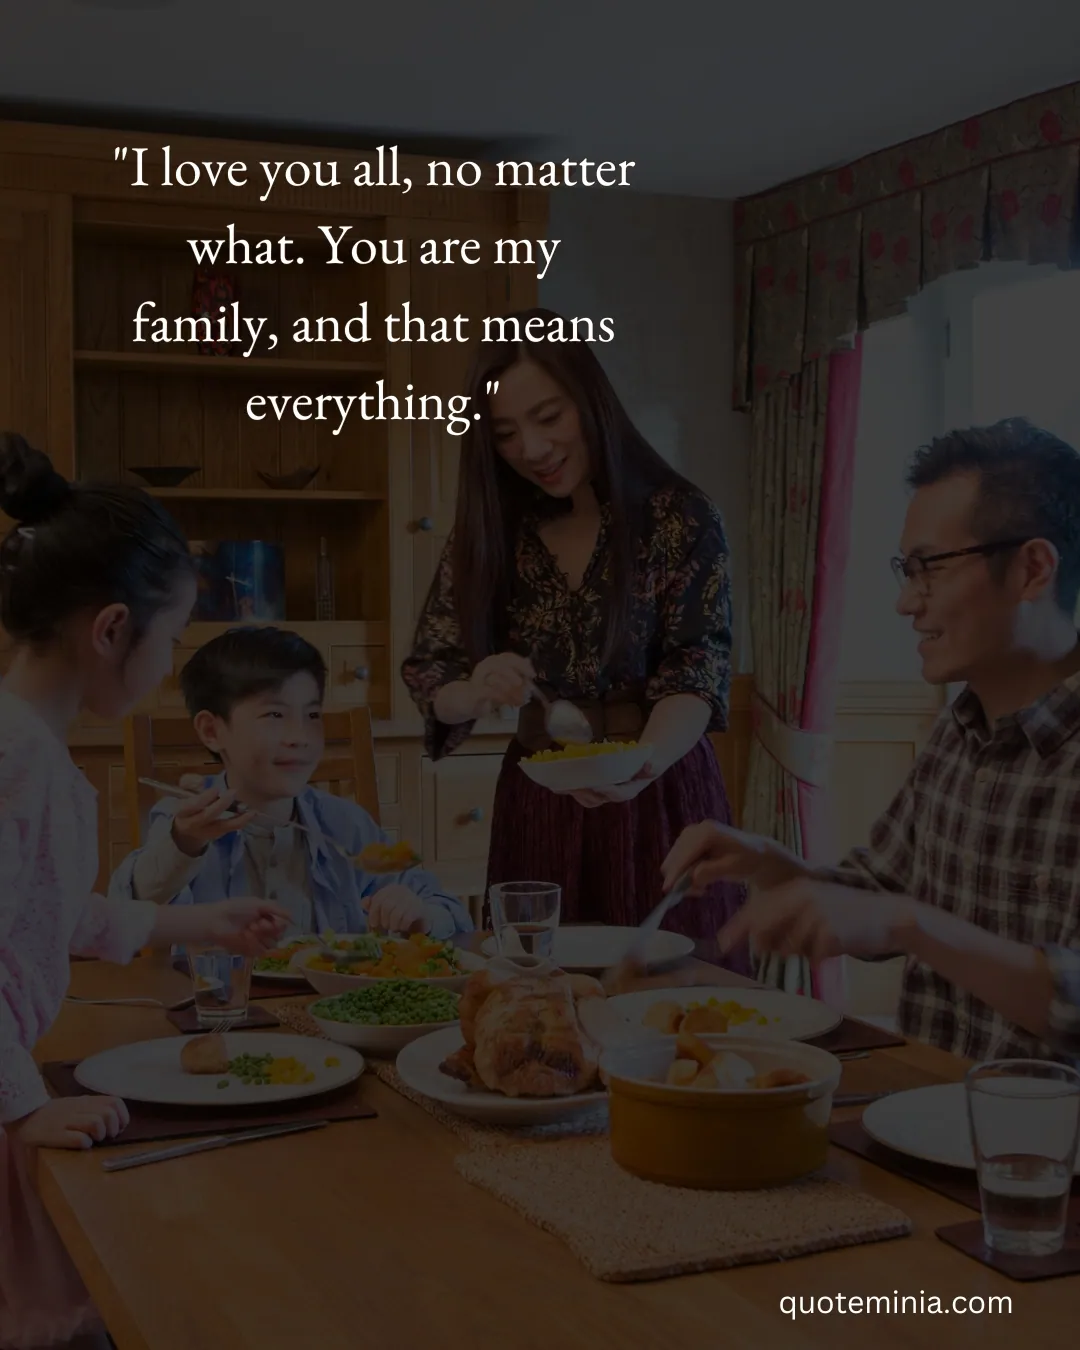 Quotes on Dinner with Family 3